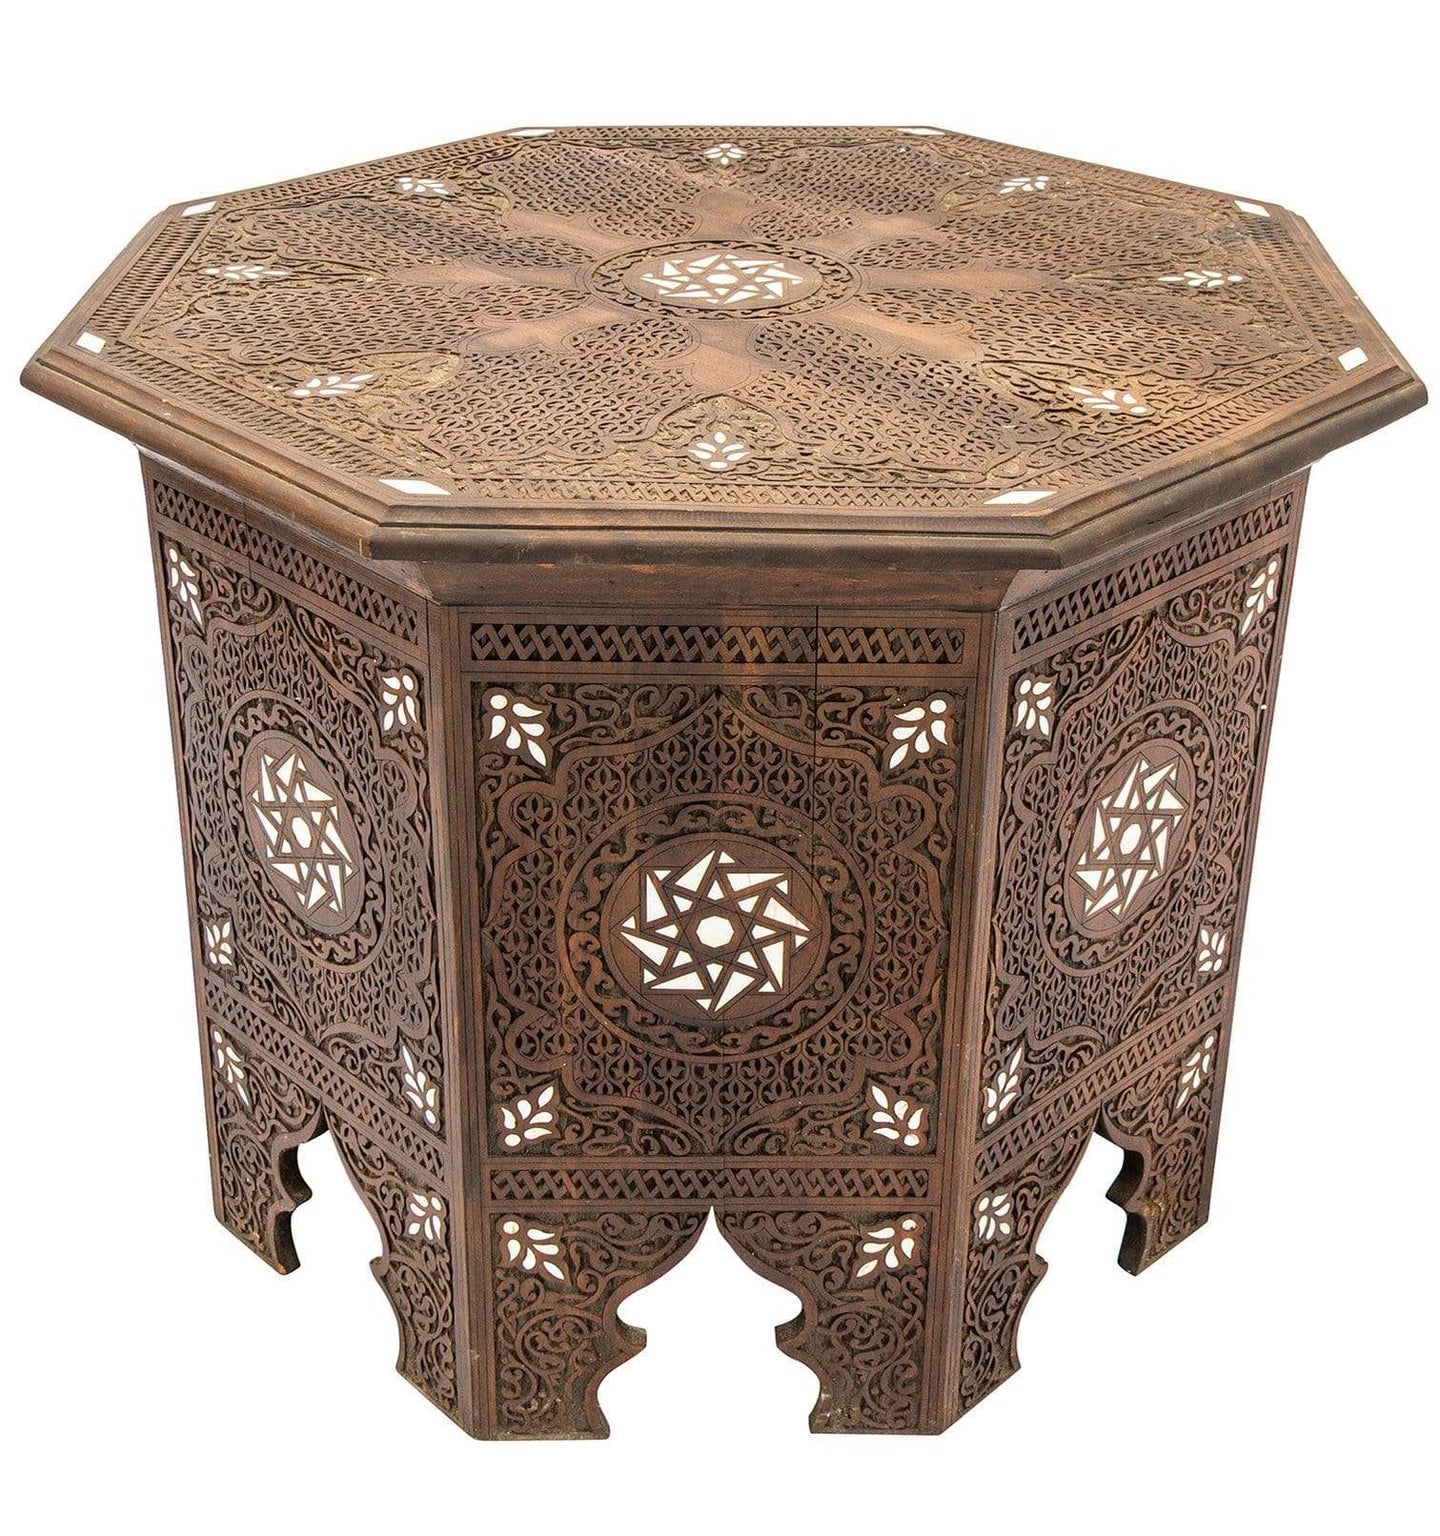 ZHOR SIDE TABLE